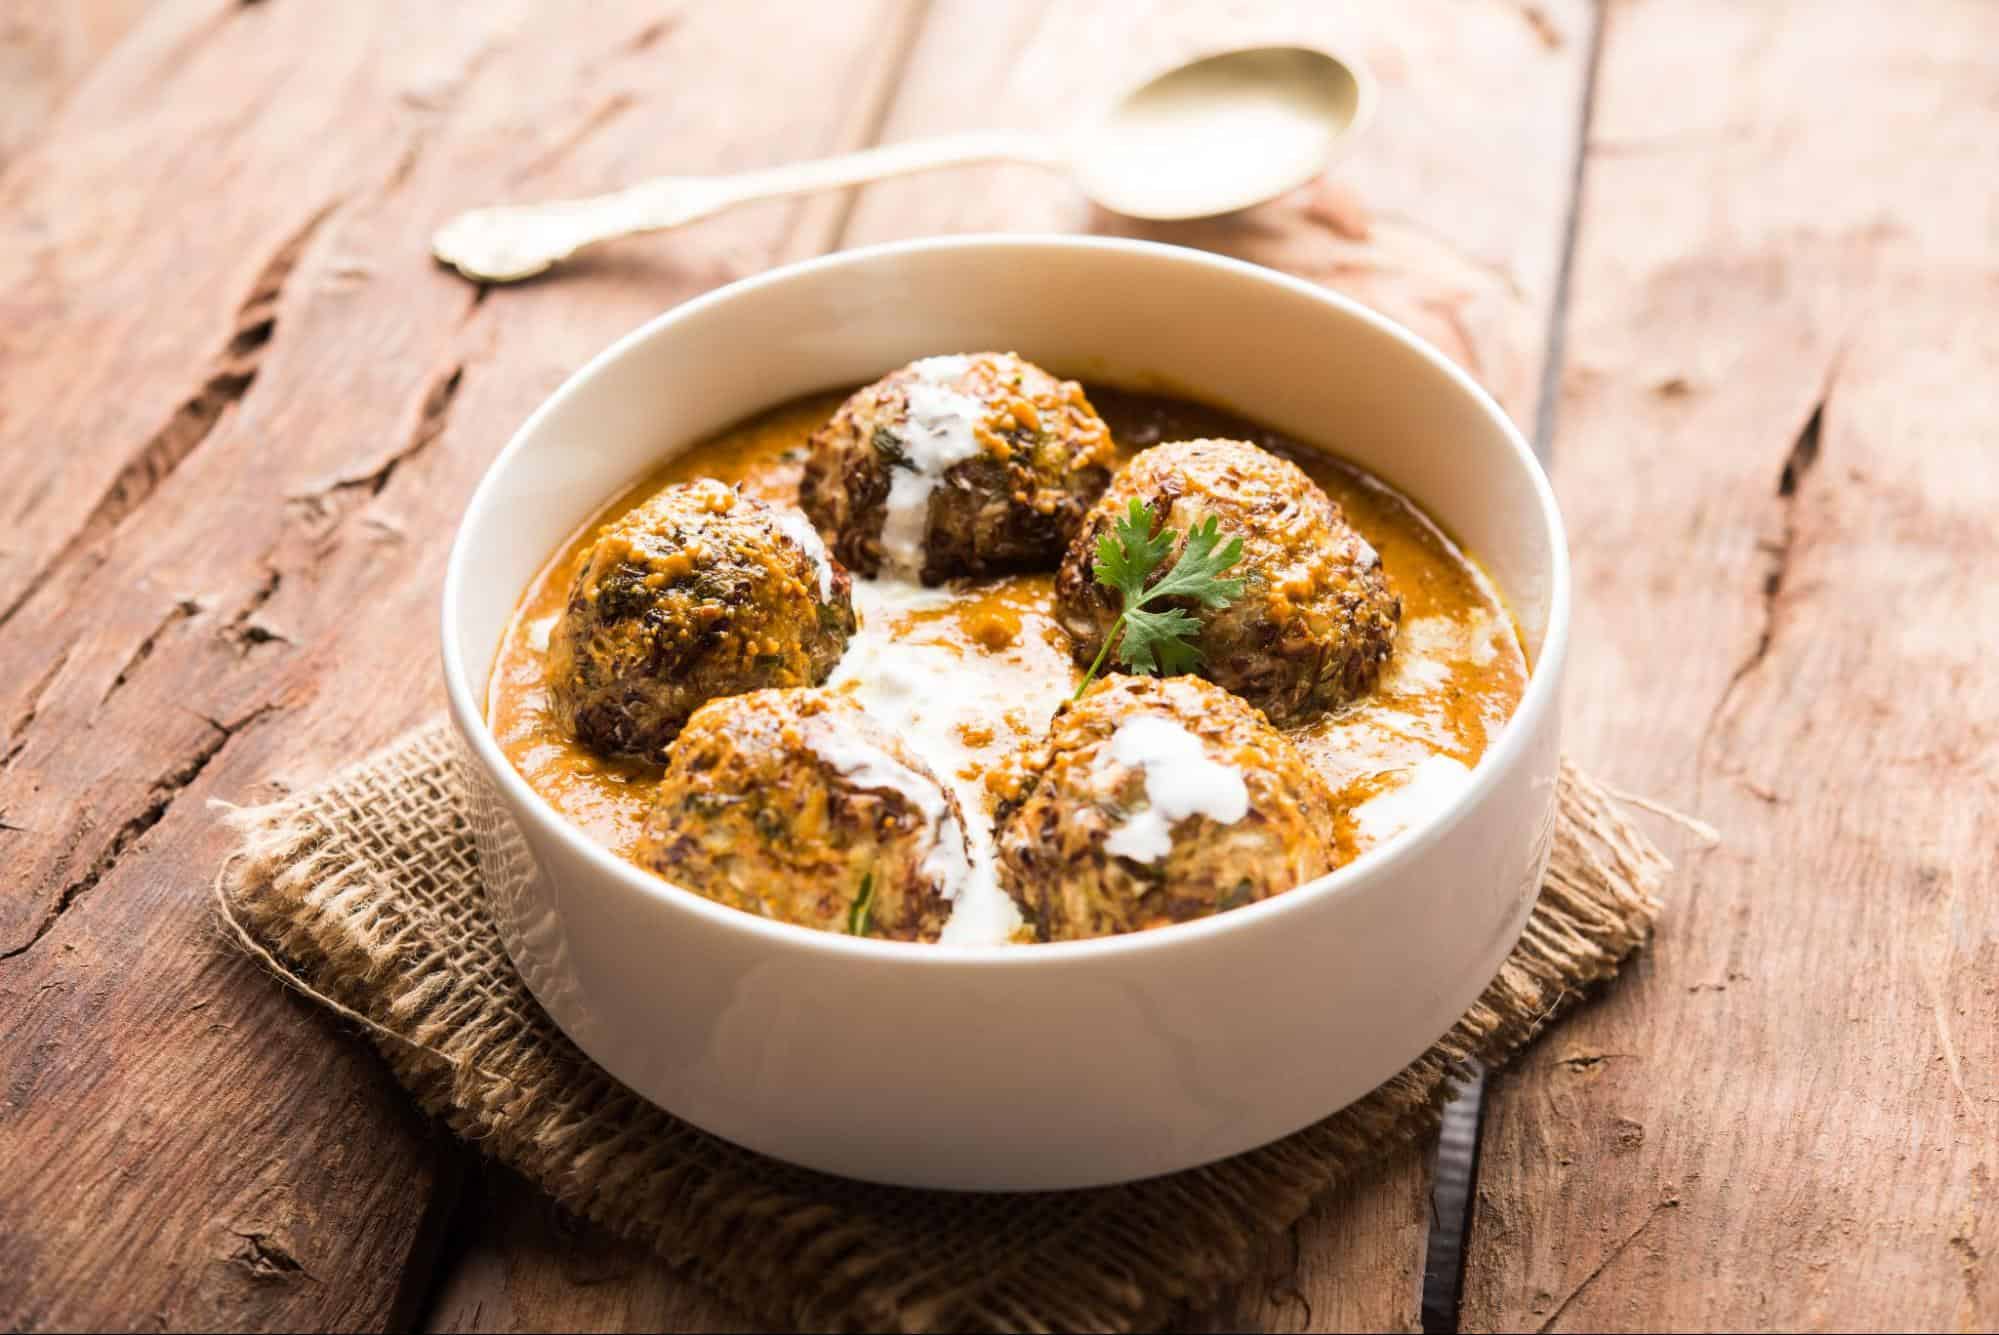 What is Malai Kofta? Learn About This Classic Vegetarian Dish